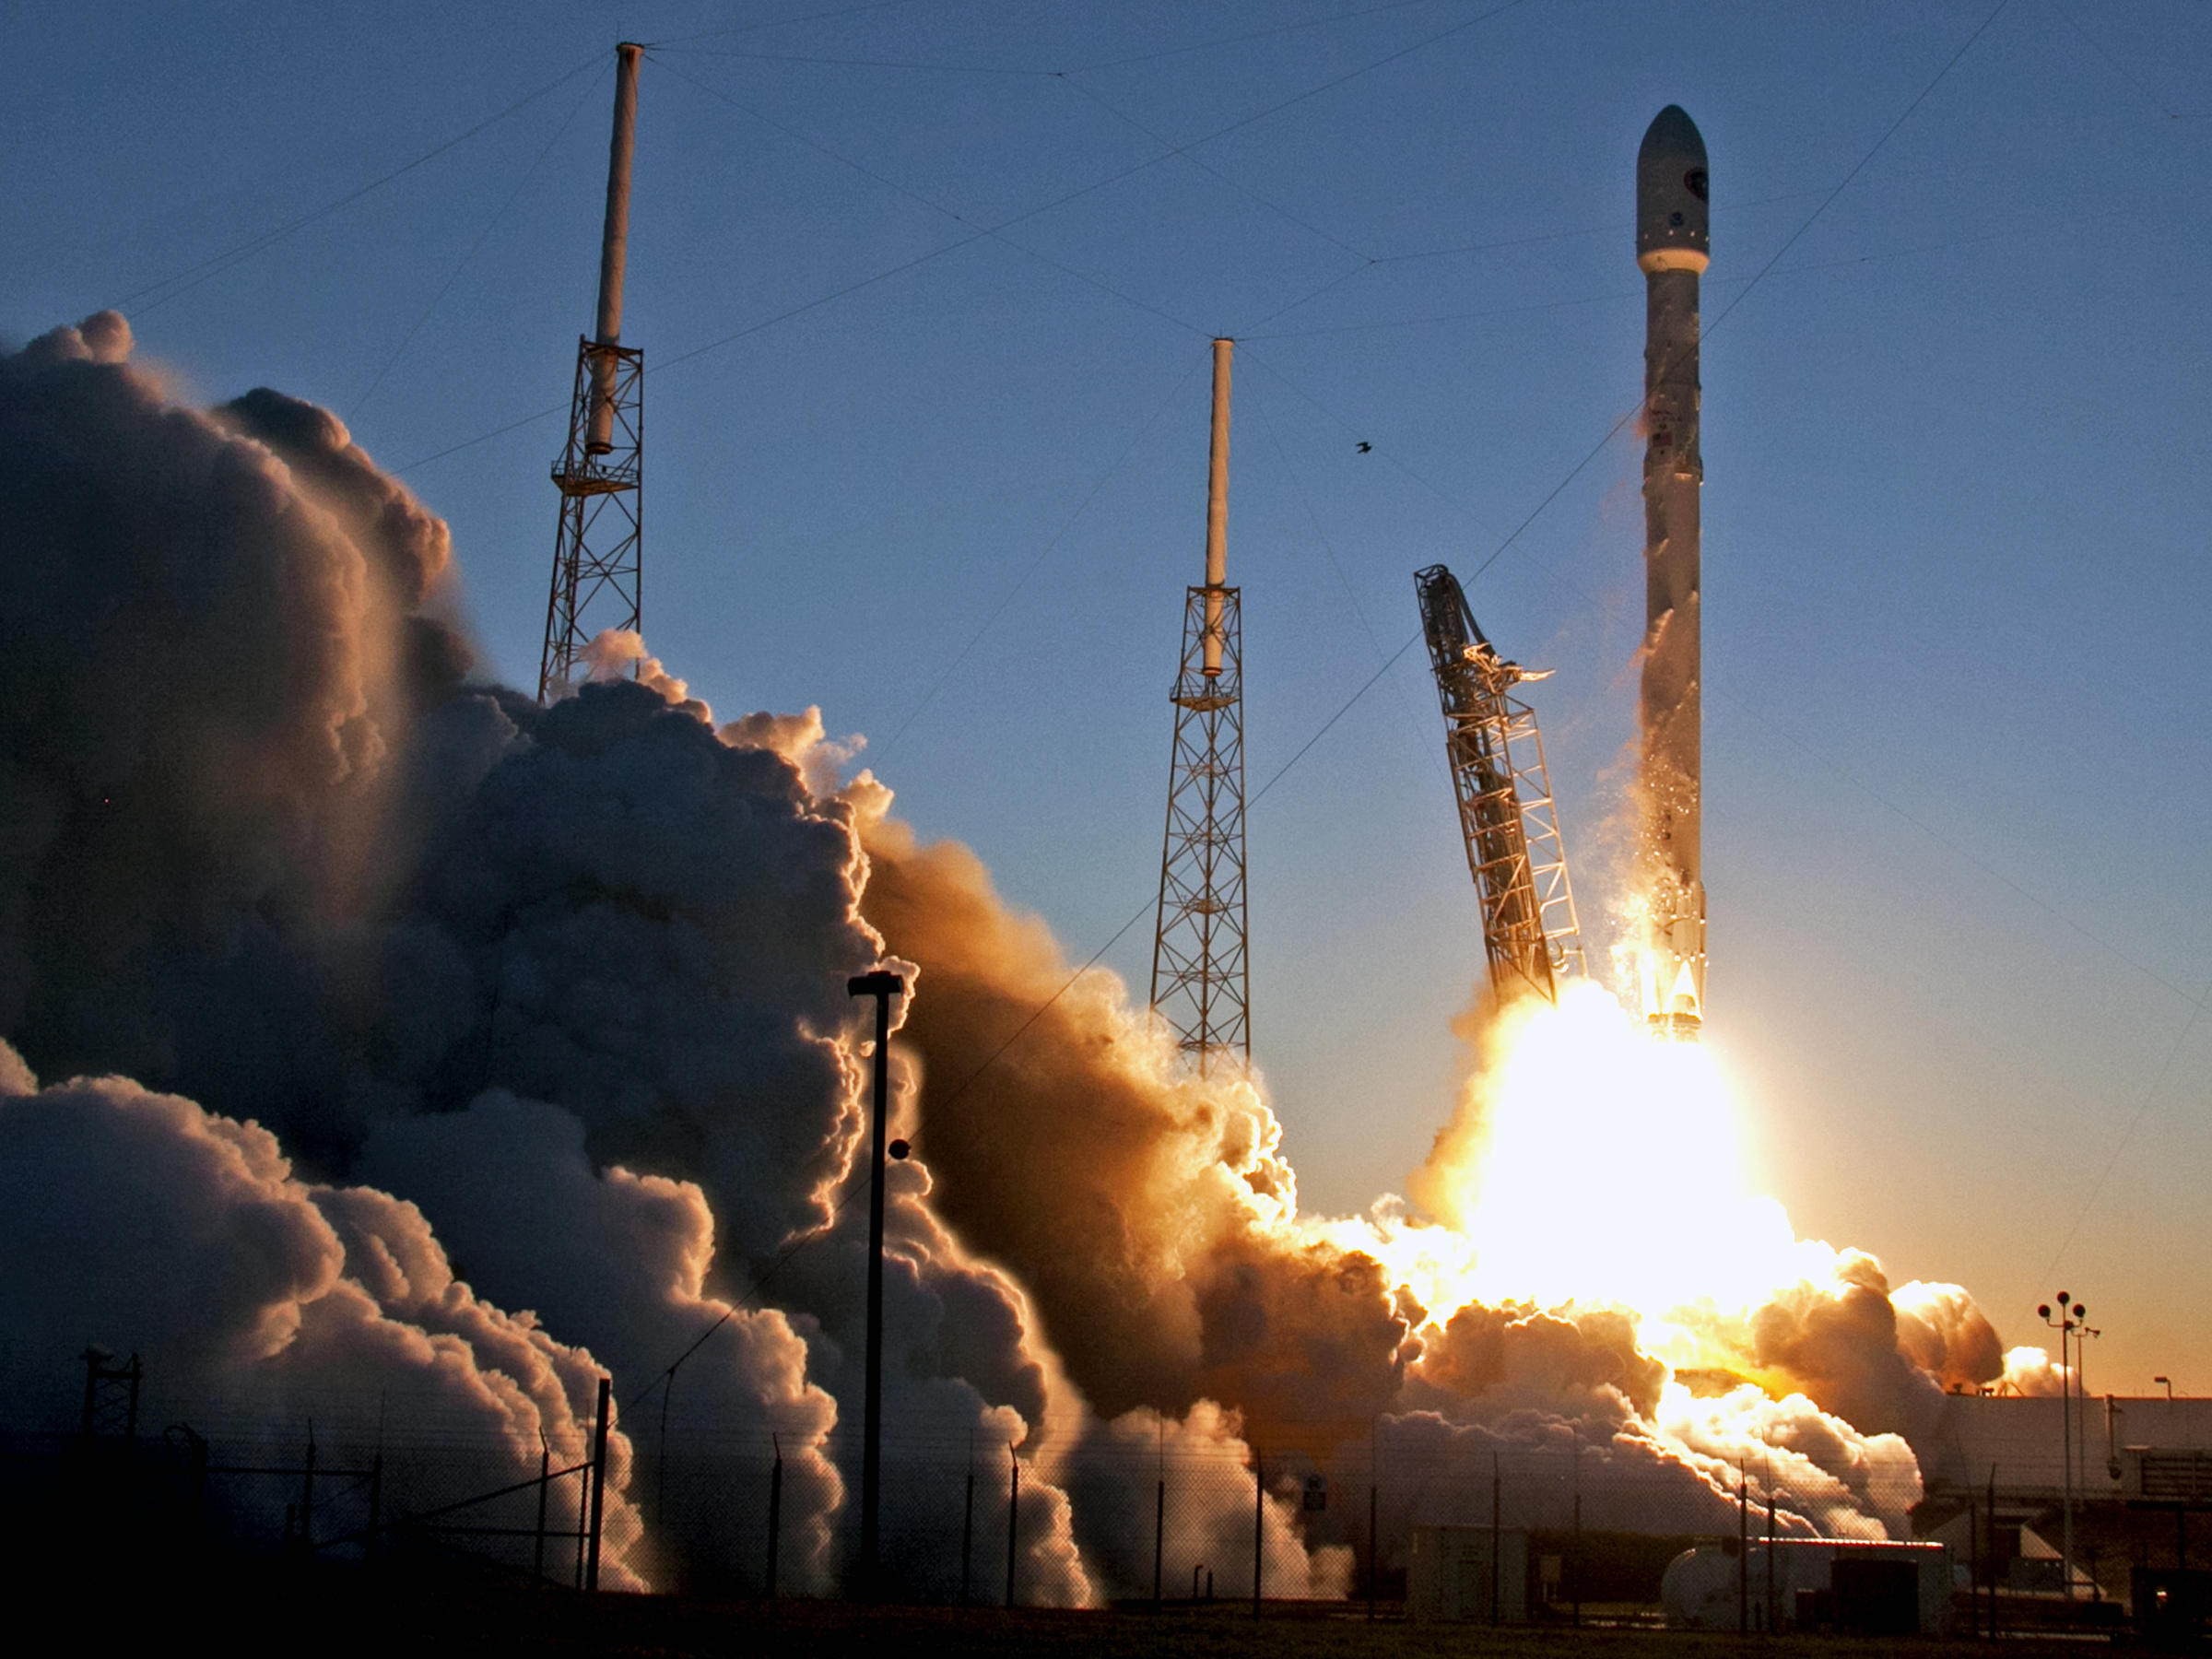 Storm Clouds Delay SpaceX Spacecraft Launch | WUSF News